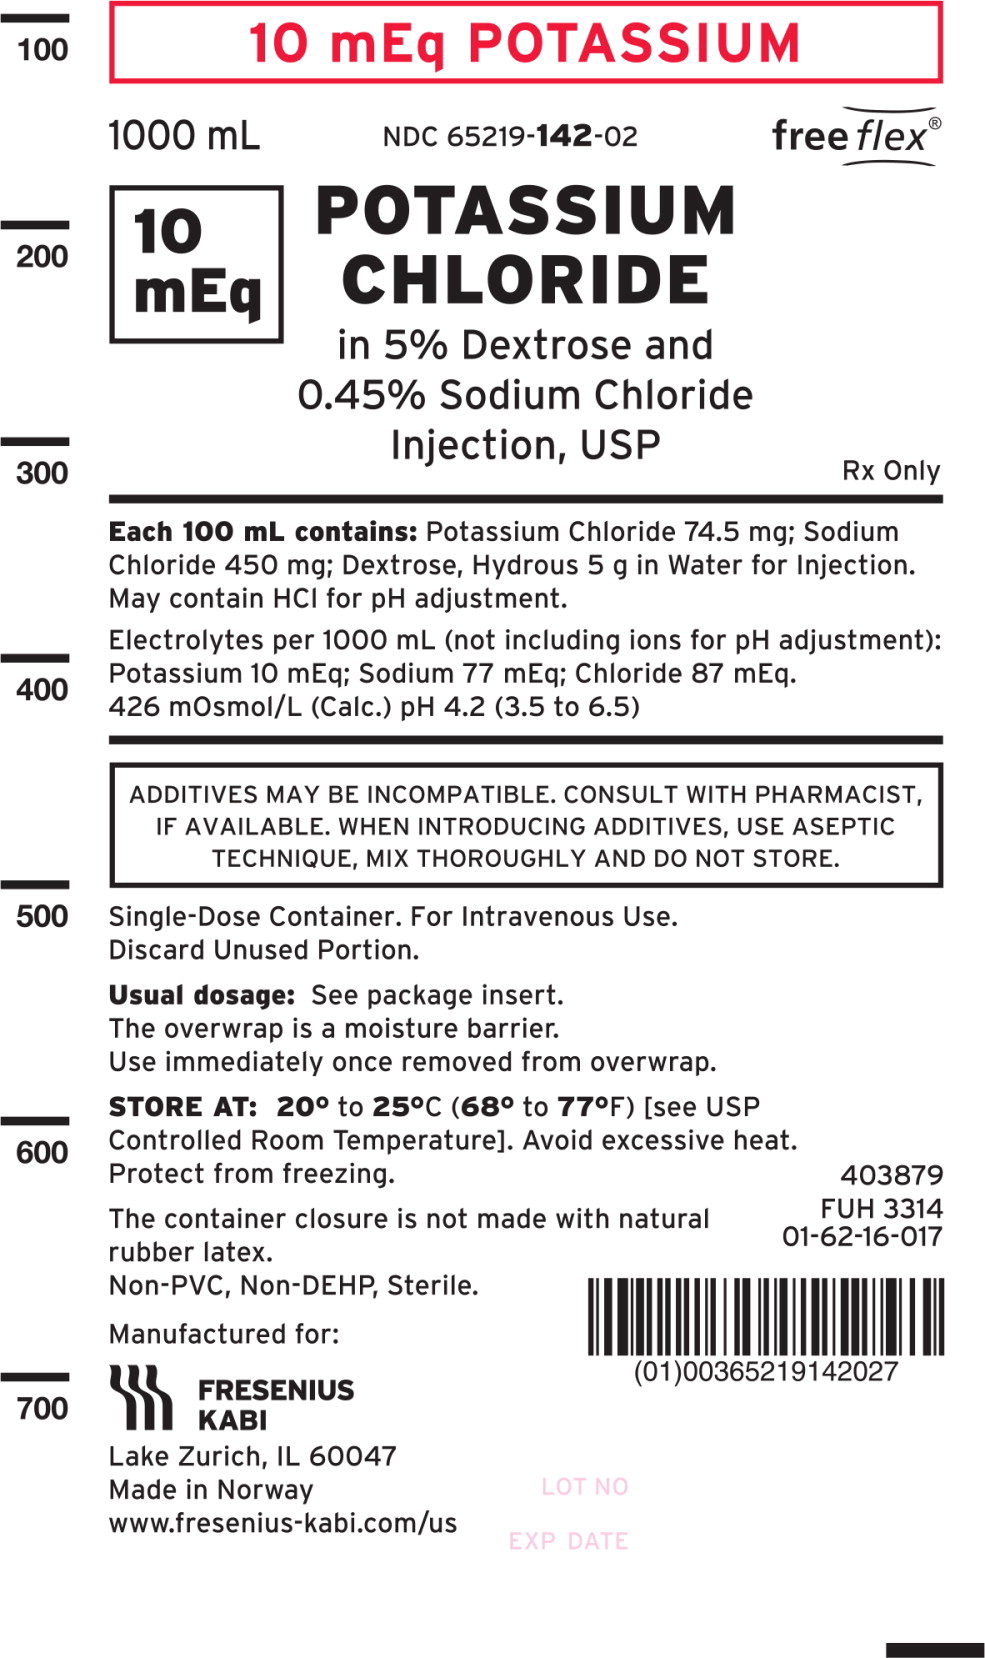 PACKAGE LABEL - PRINCIPAL DISPLAY – 10 mEq POTASSIUM CHLORIDE in 5% Dextrose and 0.45% Sodium Chloride Injection, USP 1000 mL Bag Label
